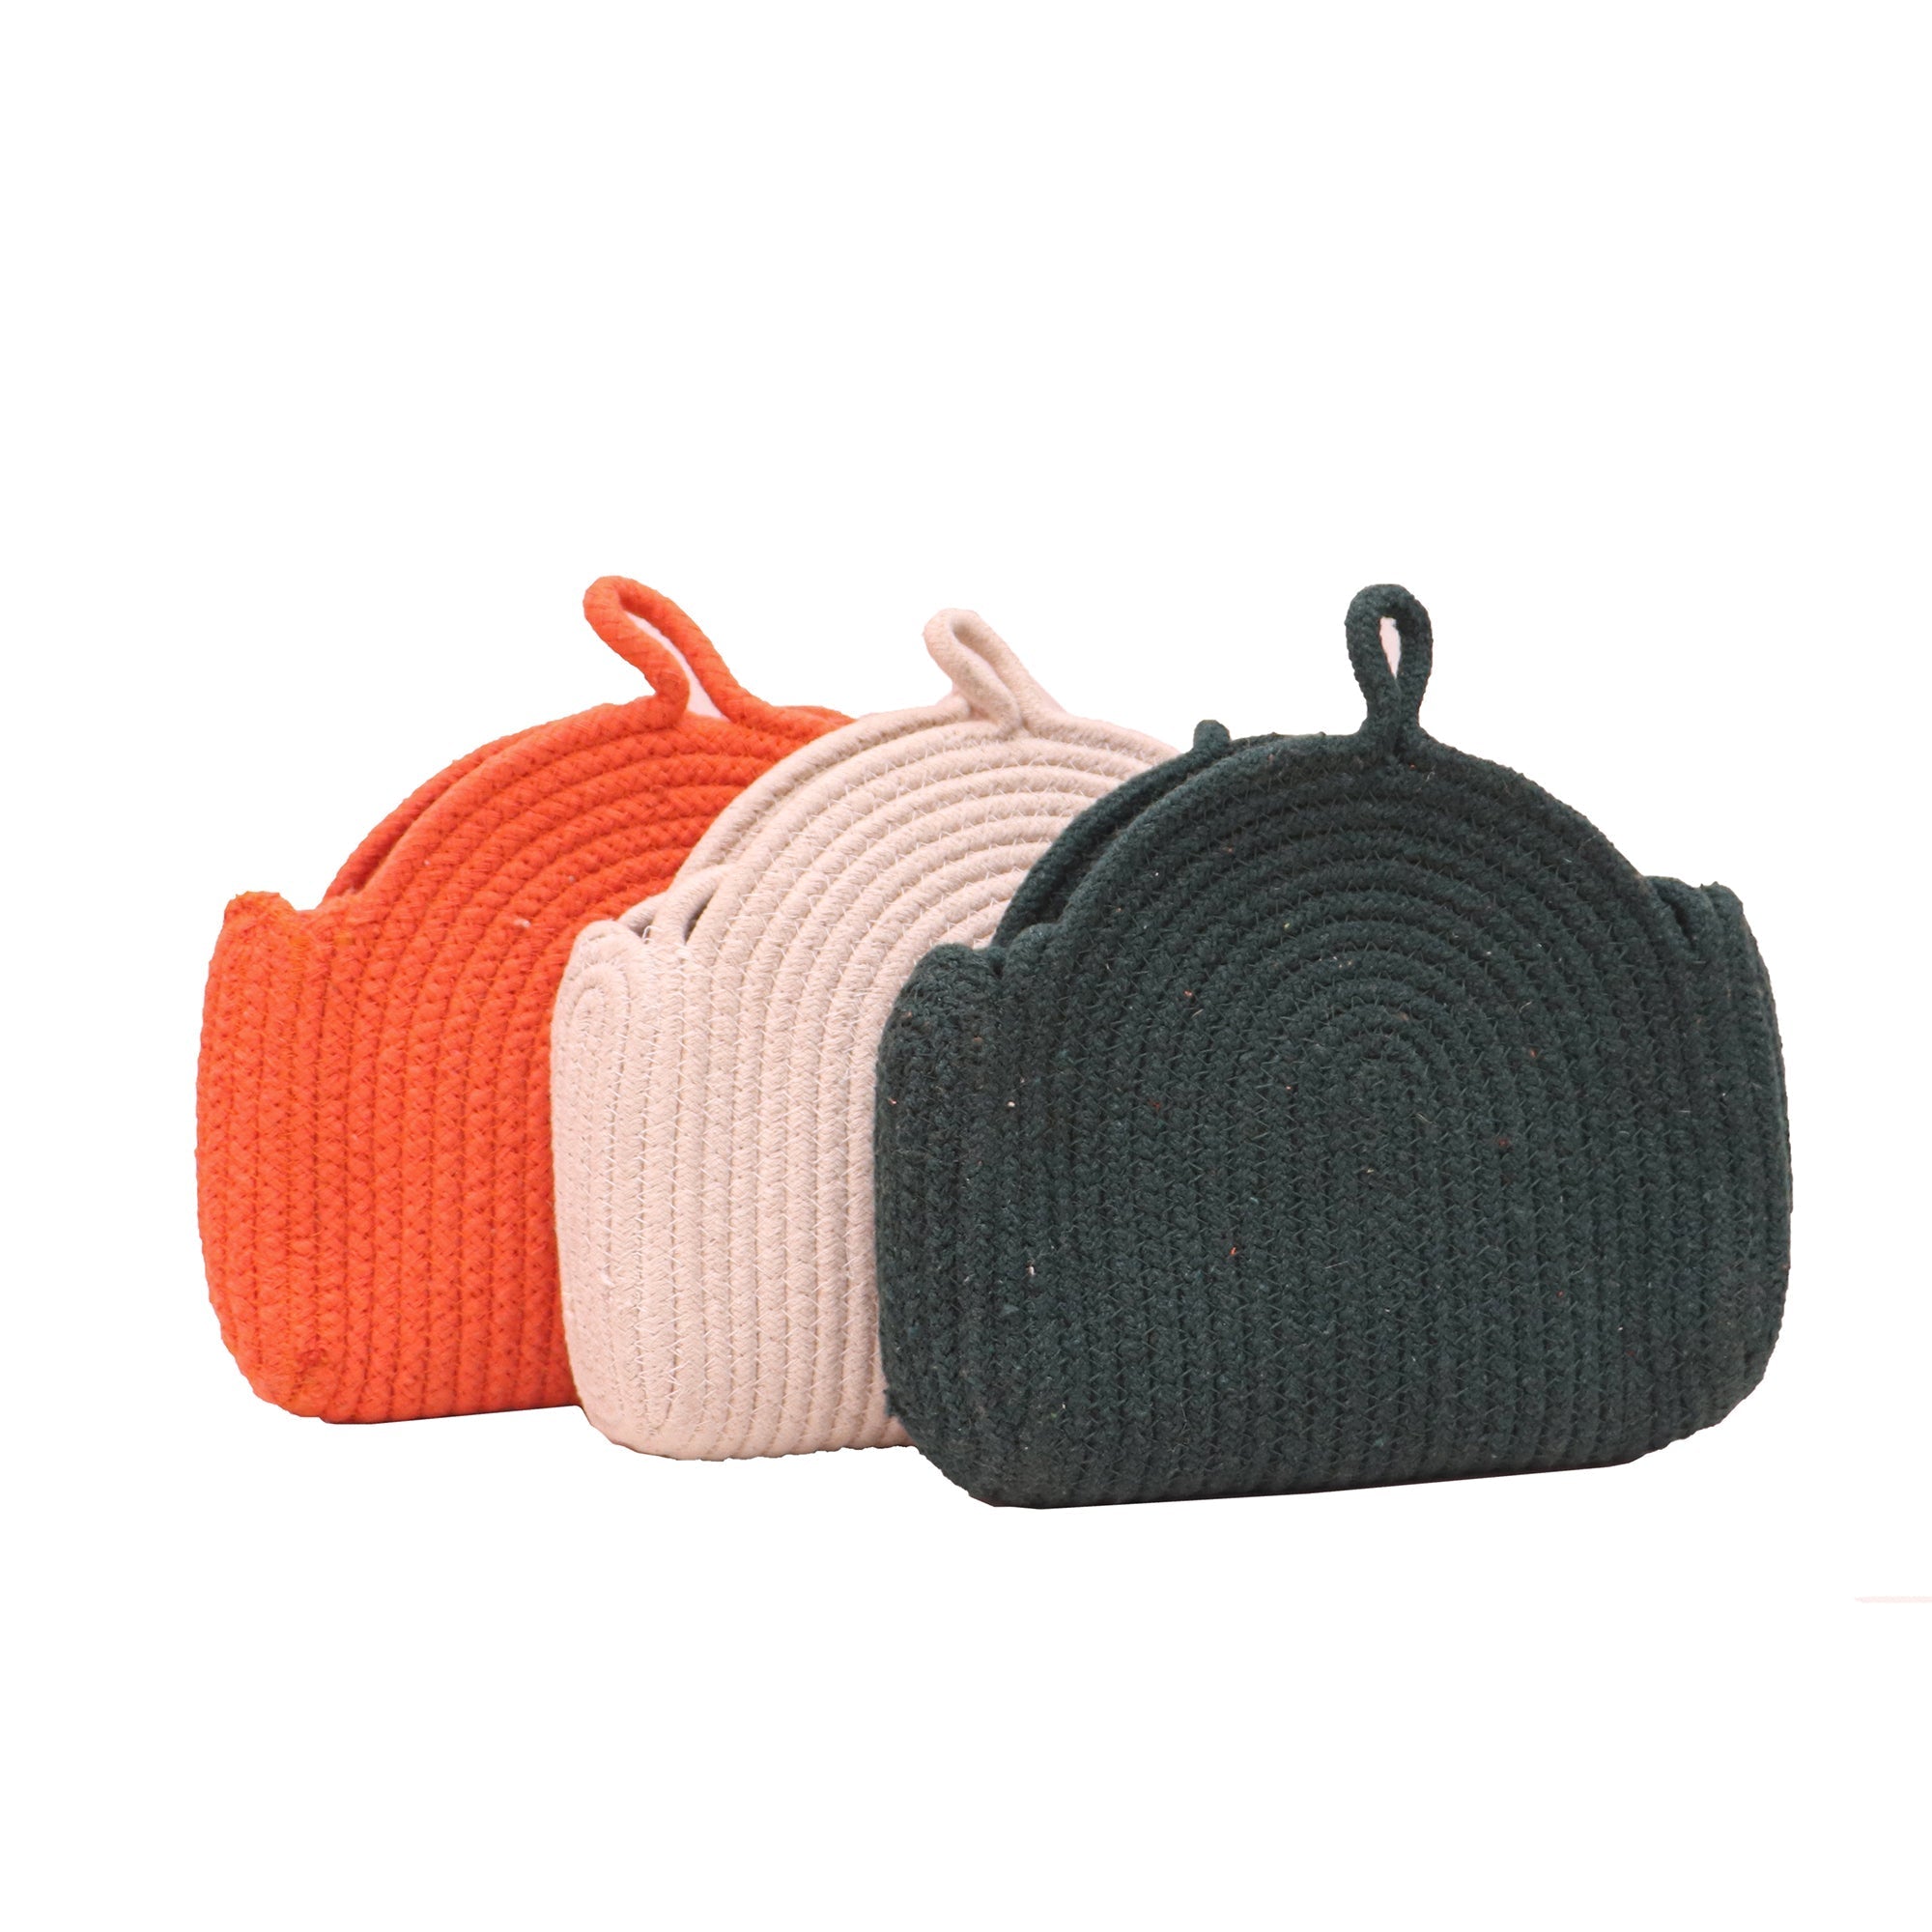 Sling Bags set of 3 Wemy Store